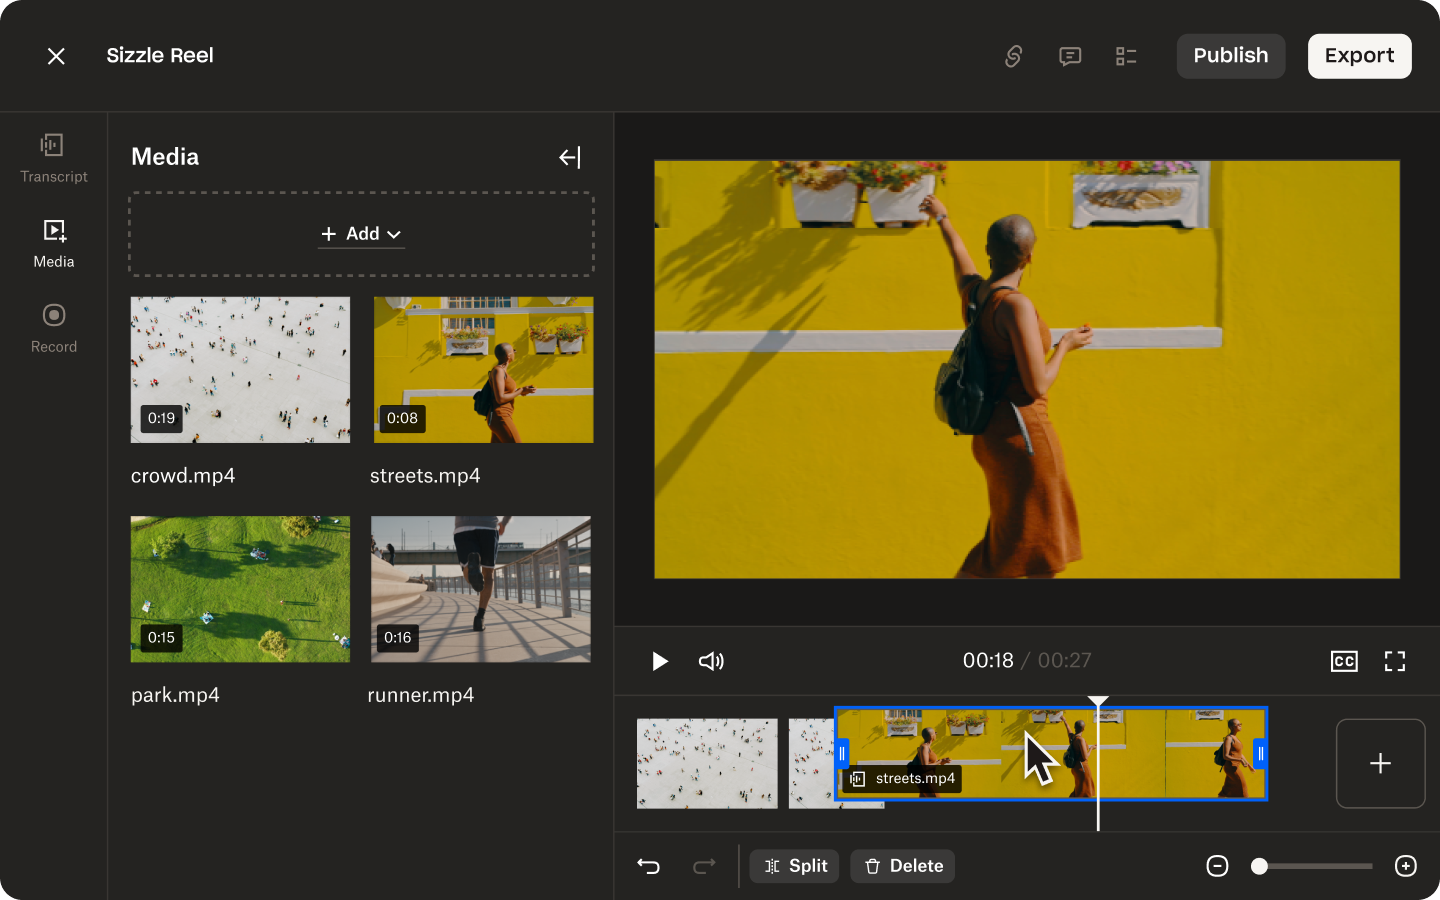 With Dropbox Studio, users can collaborate on video projects